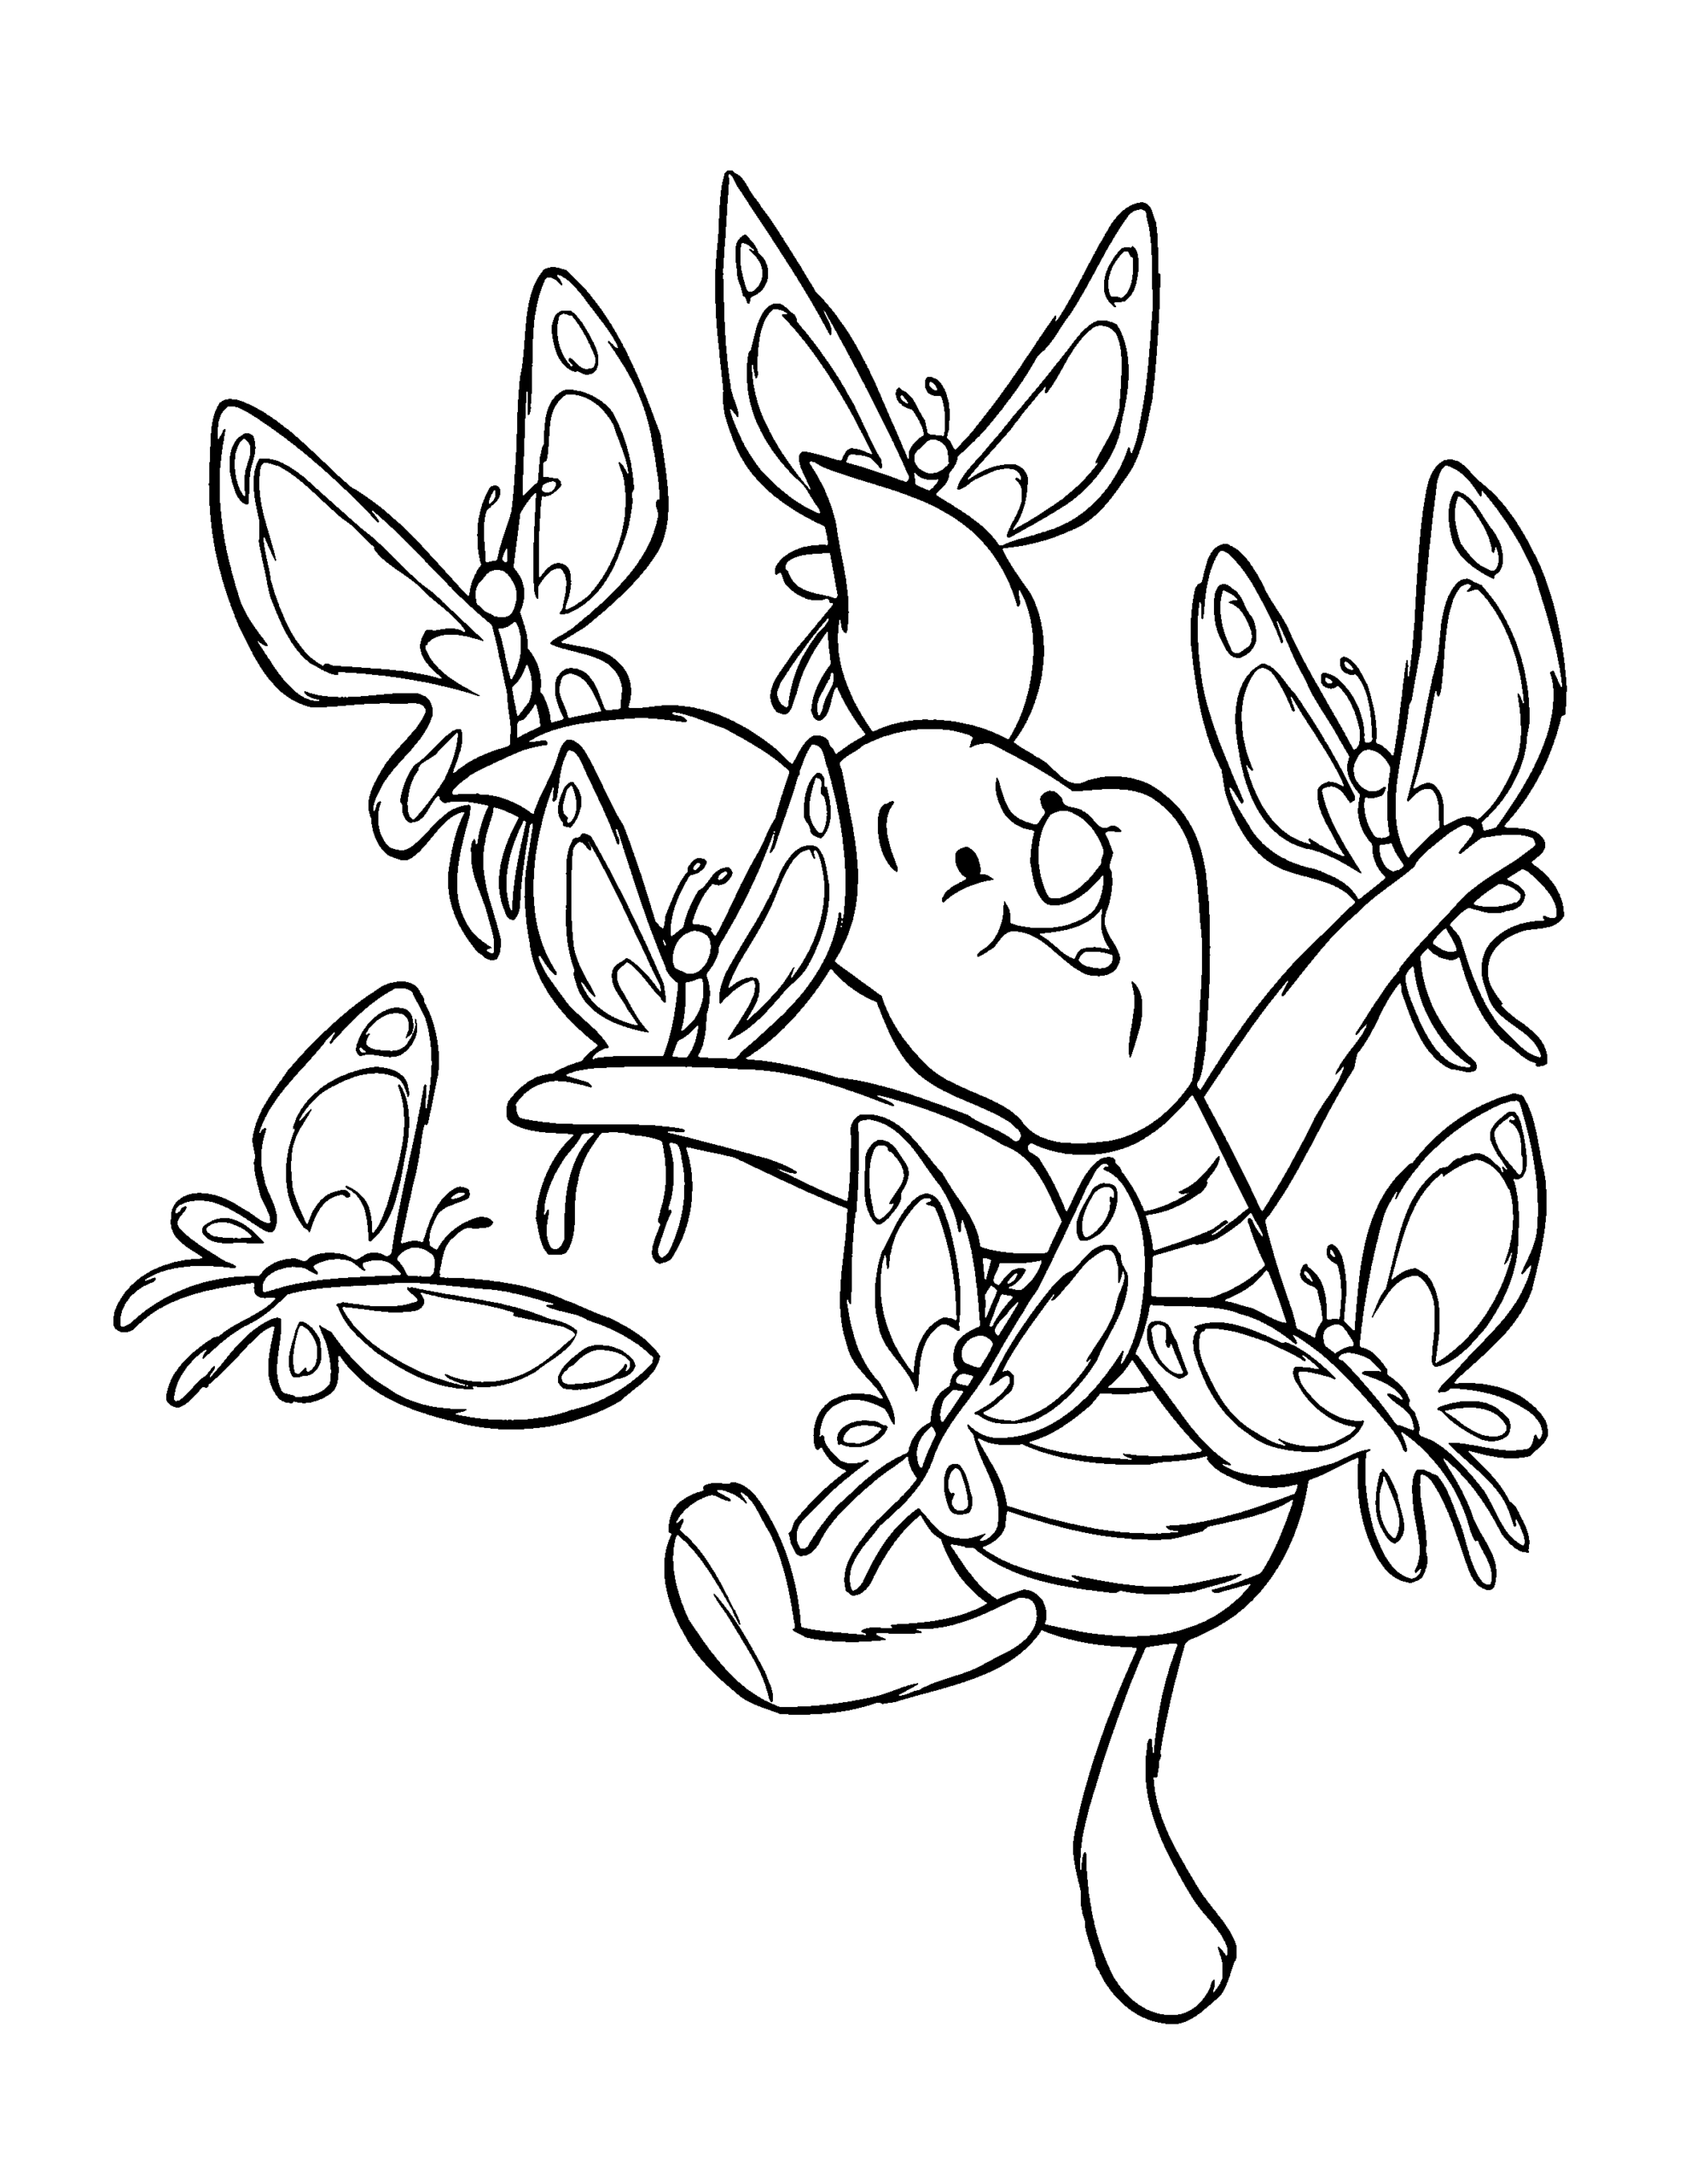 Winnie the Pooh Coloring Pages Cartoons winnie the pooh 37 Printable 2020 7143 Coloring4free